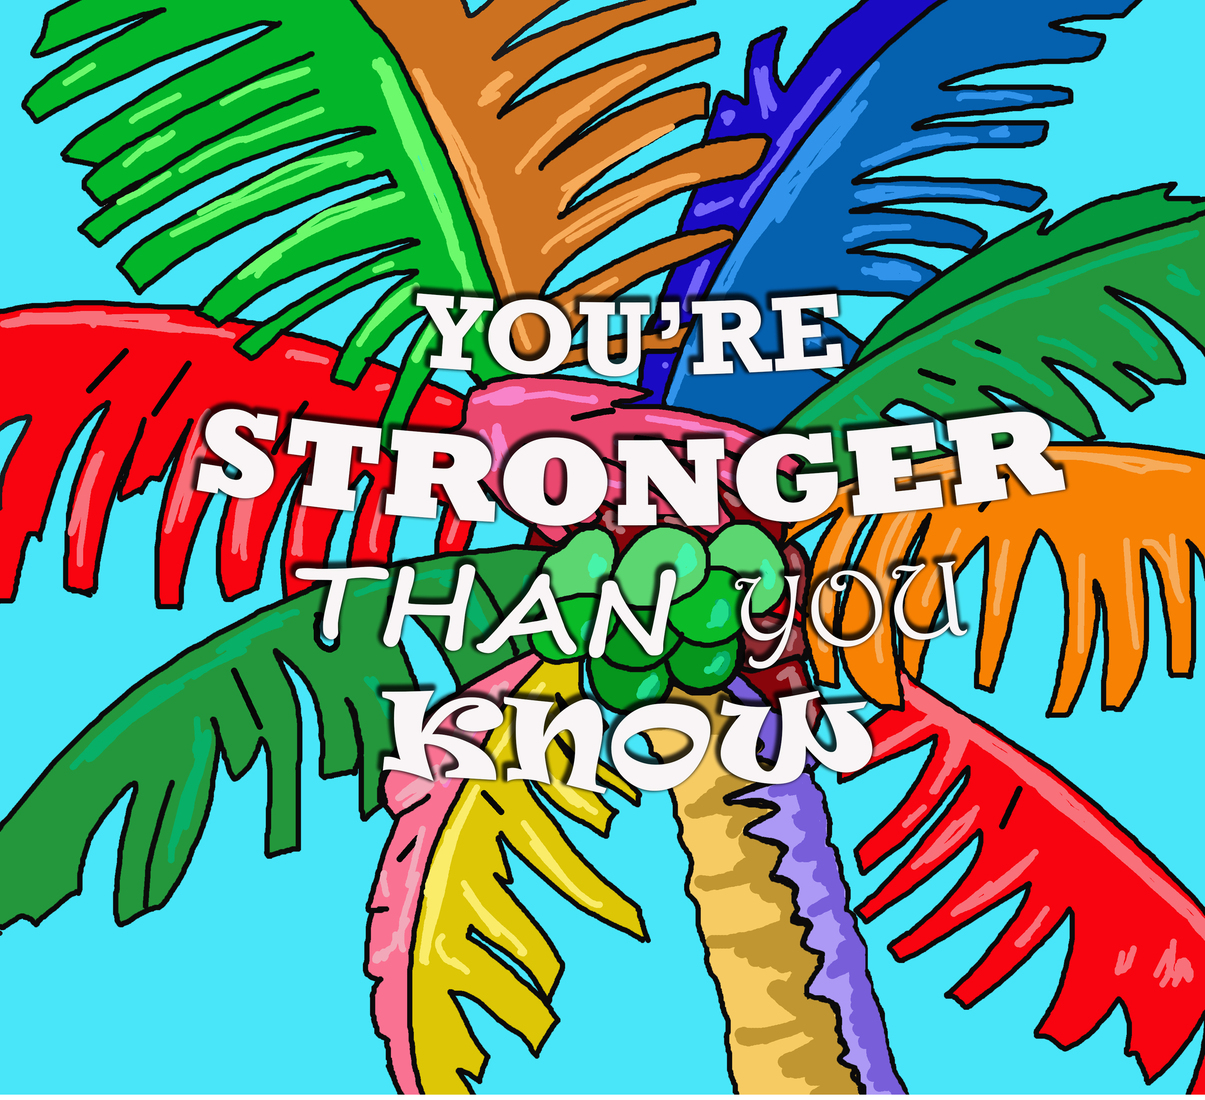 You're stronger than you know